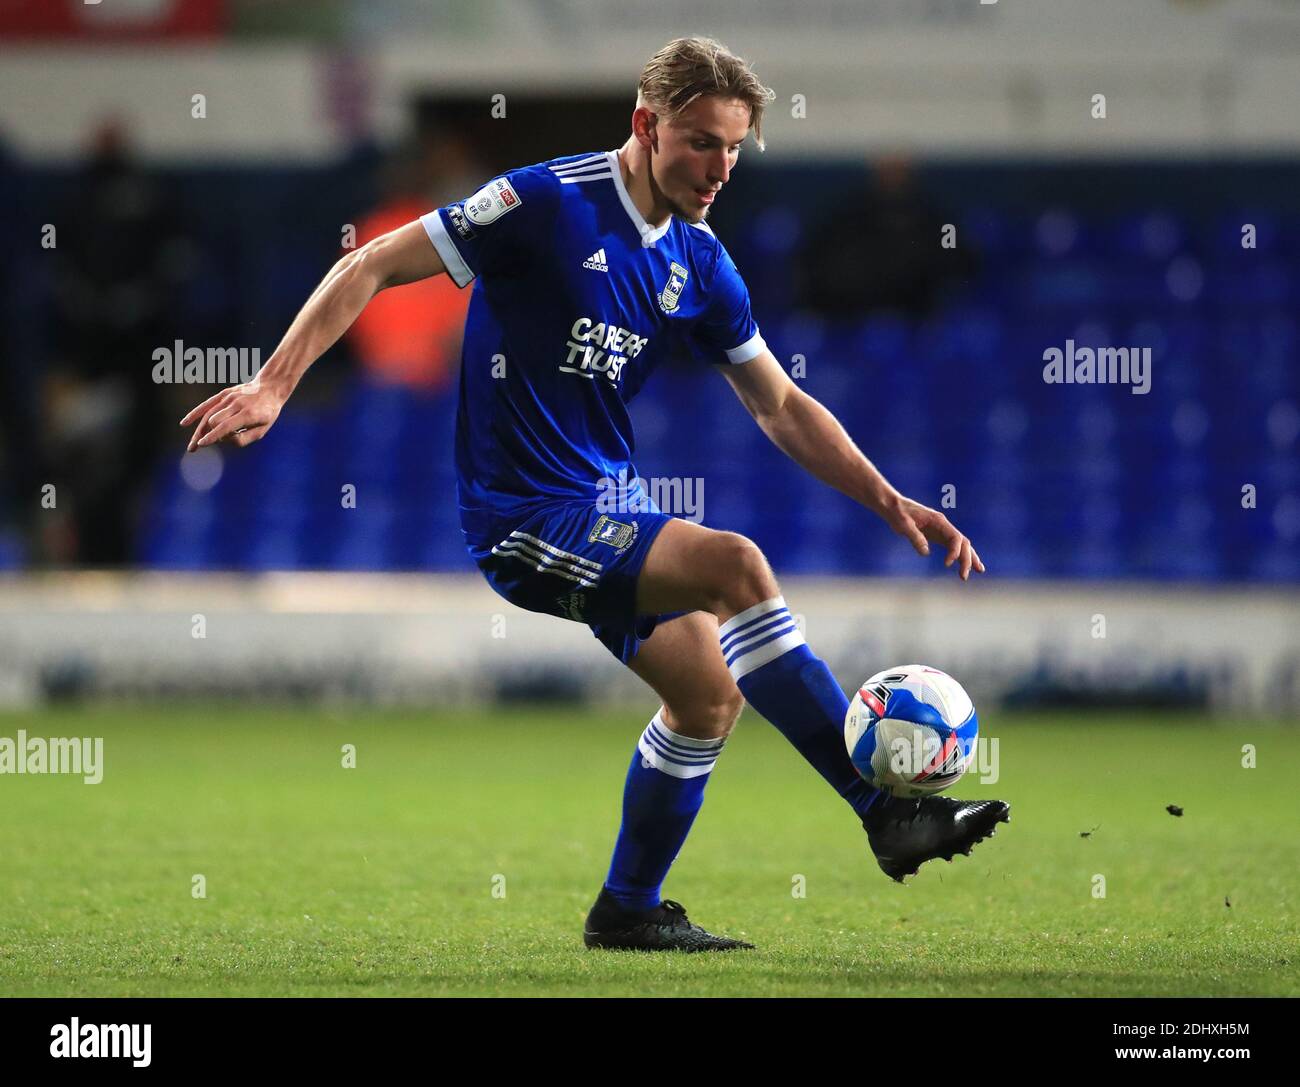 Ipswich Town's Luke Woolfenden during the Sky Bet League One match at Portman Road, Ipswich. Stock Photo